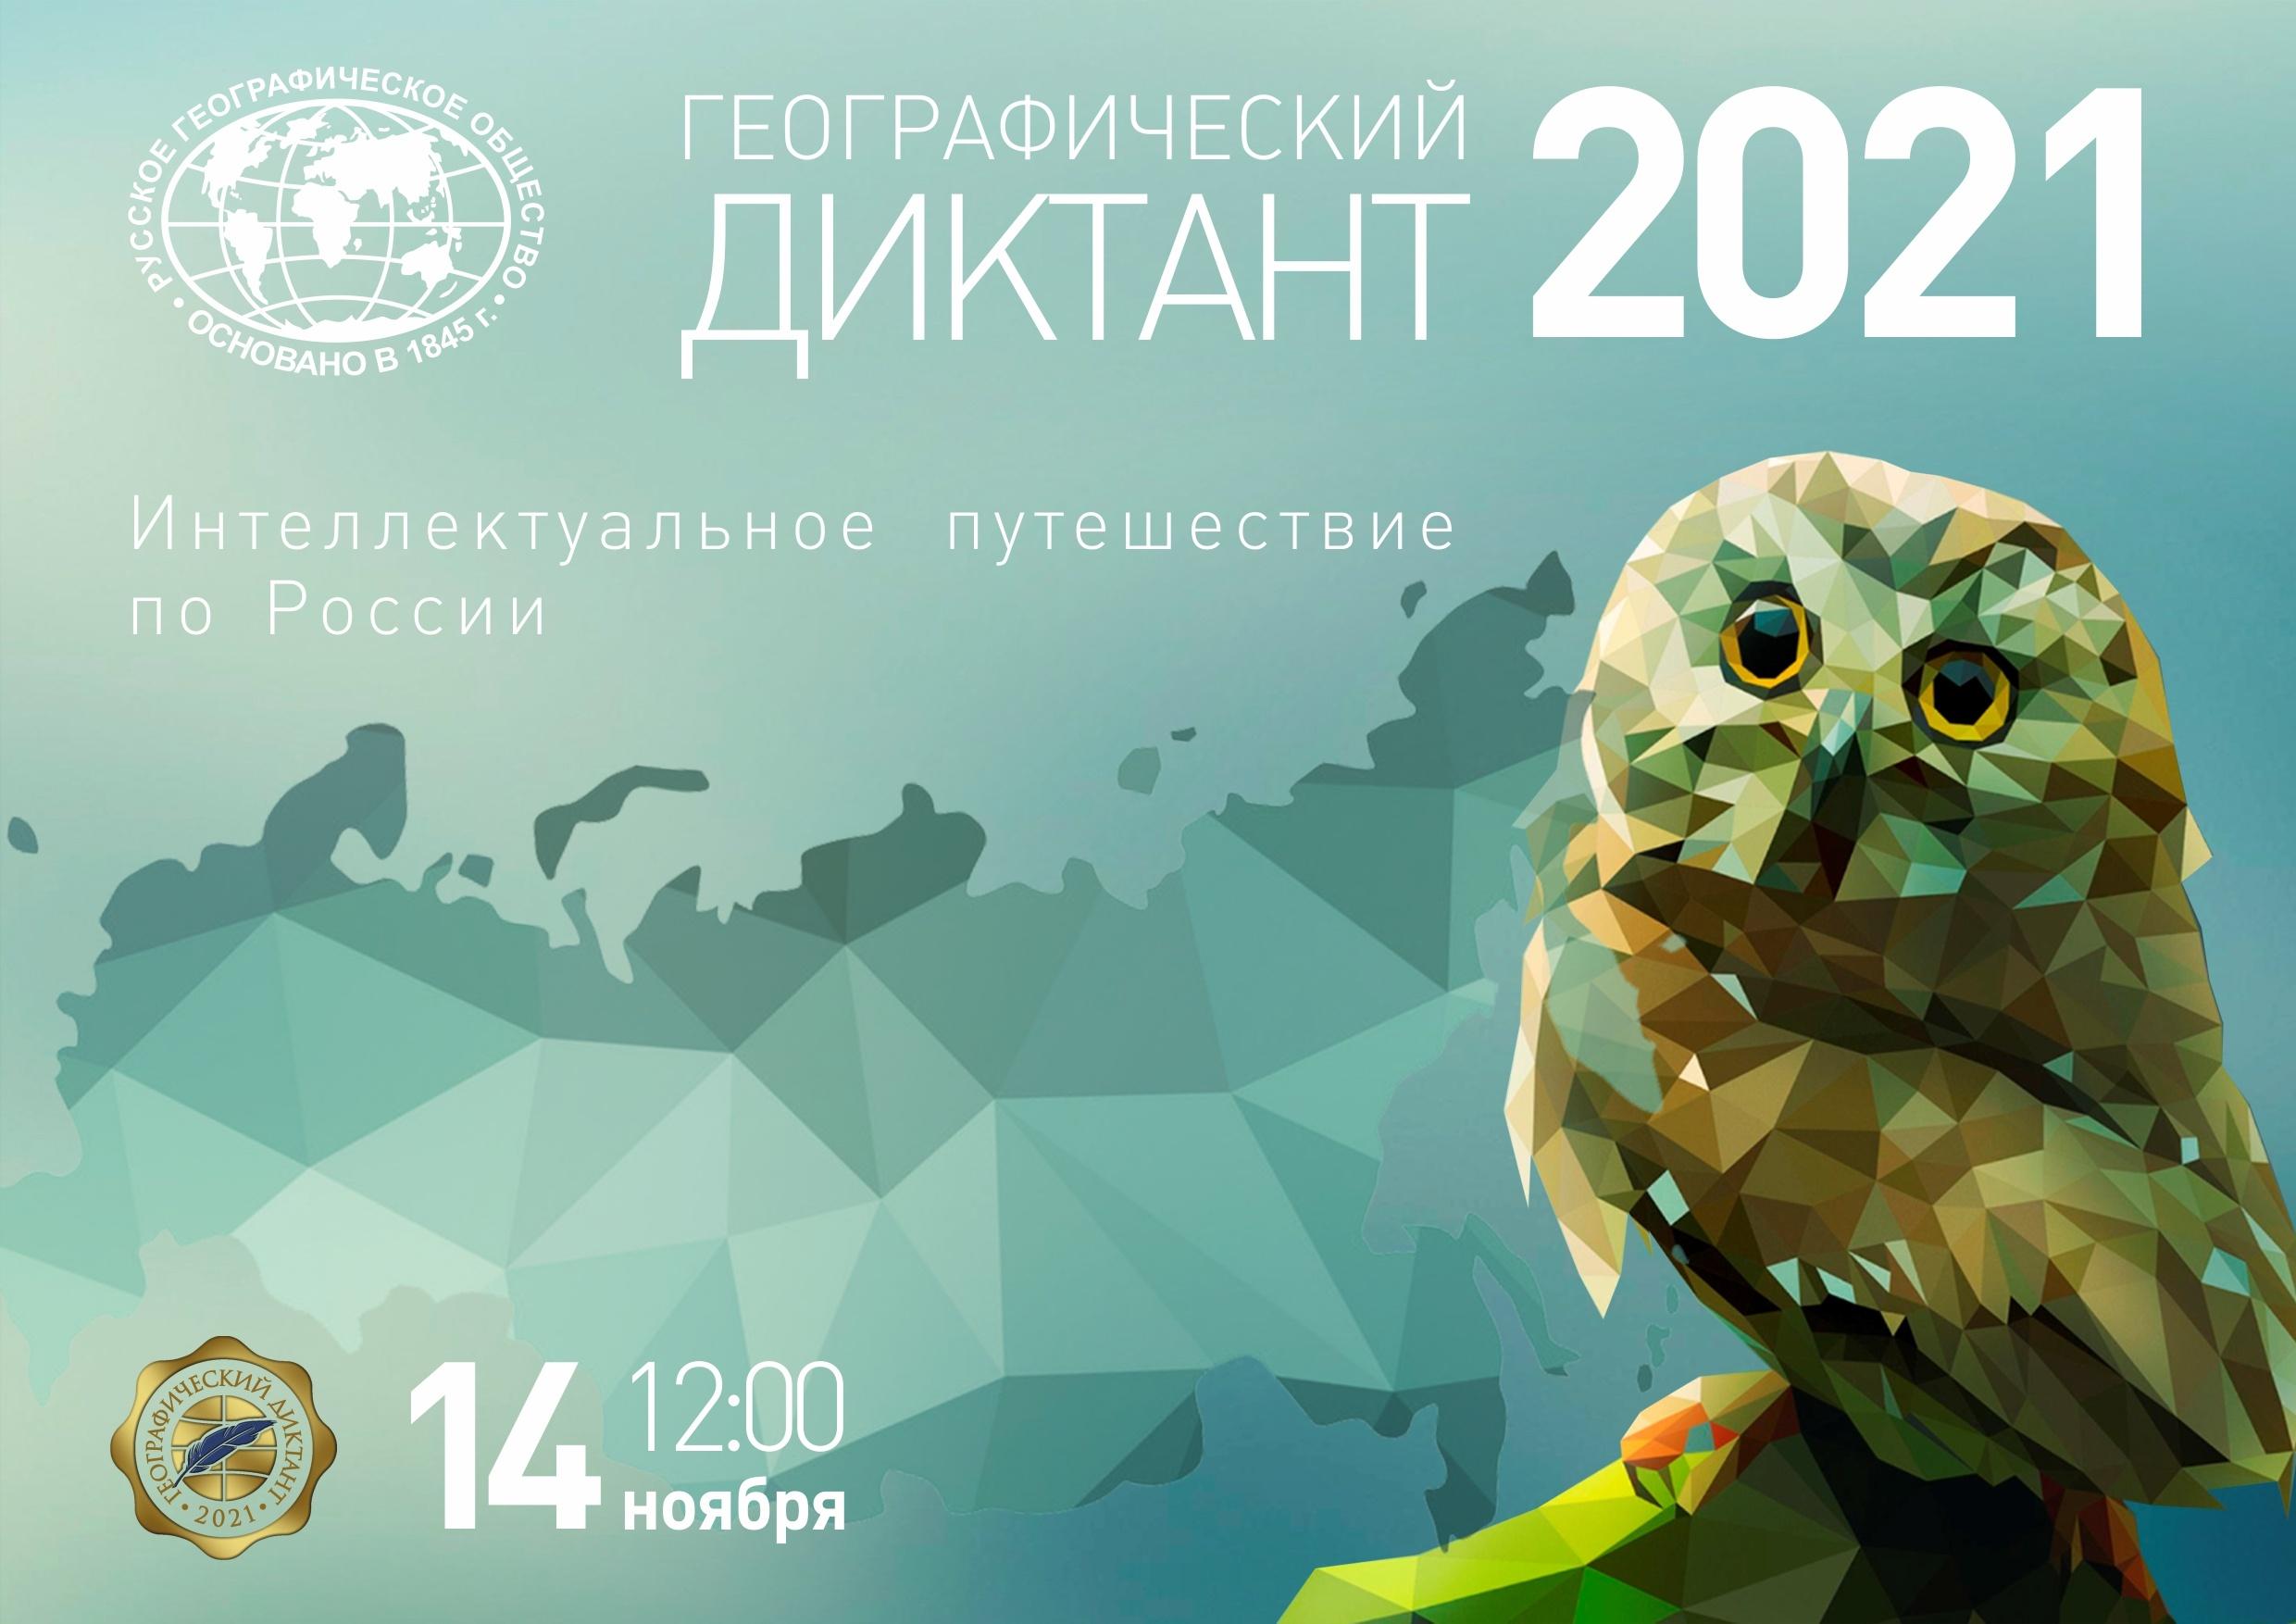 You are currently viewing Географический диктант-2021